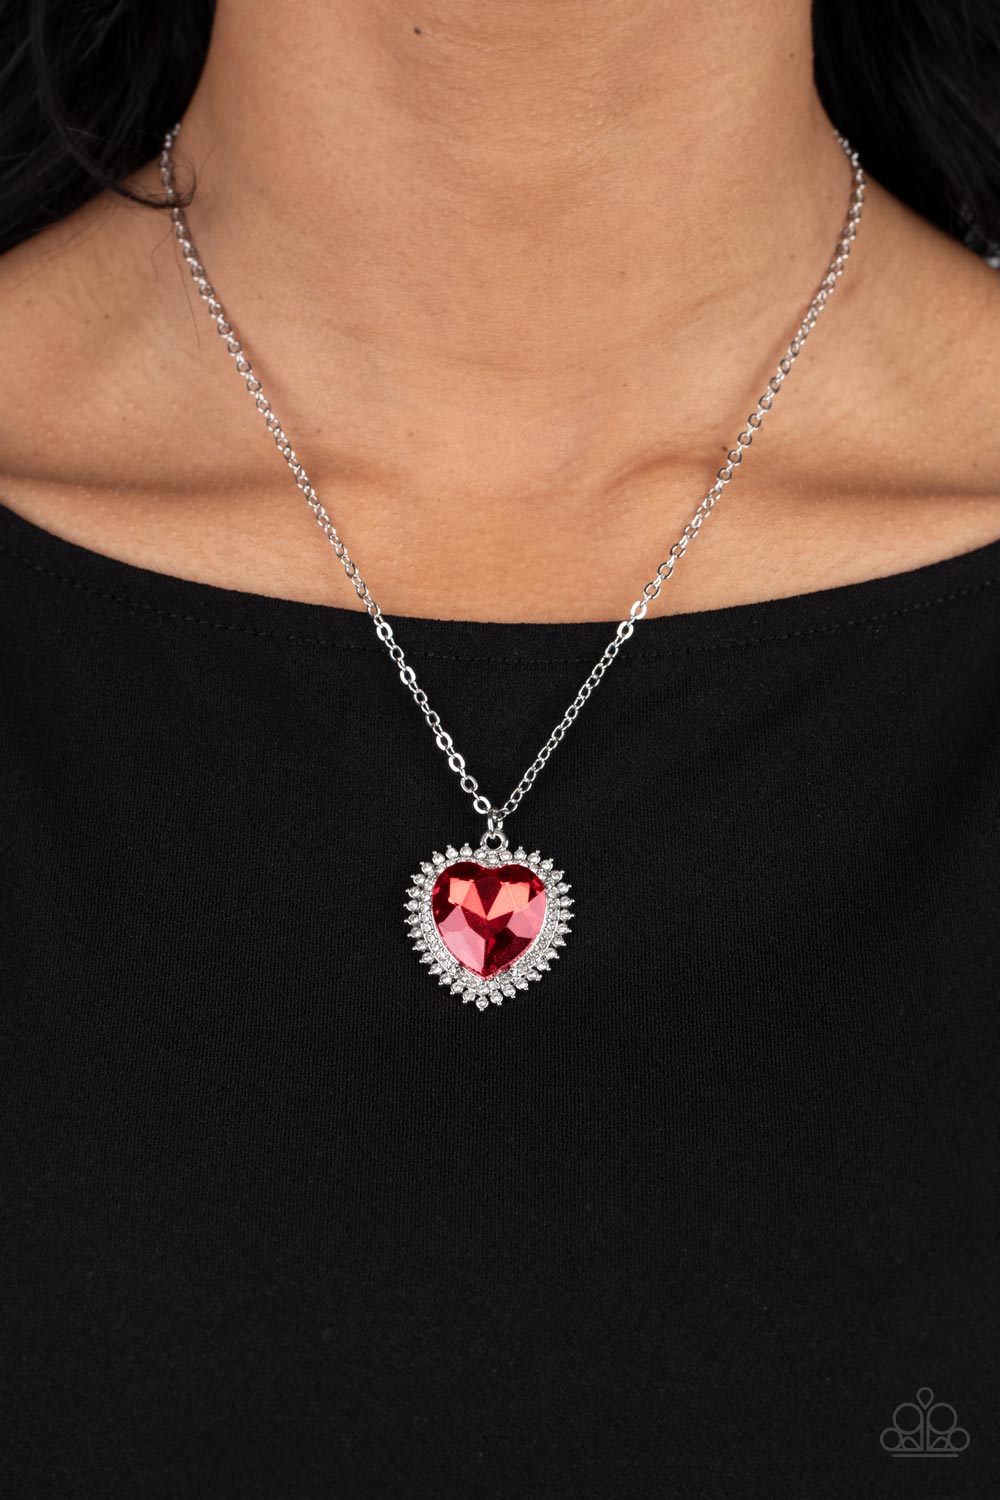 Sweethearts Stroll Red Rhinestone Heart Necklace - Paparazzi Accessories-on model - CarasShop.com - $5 Jewelry by Cara Jewels